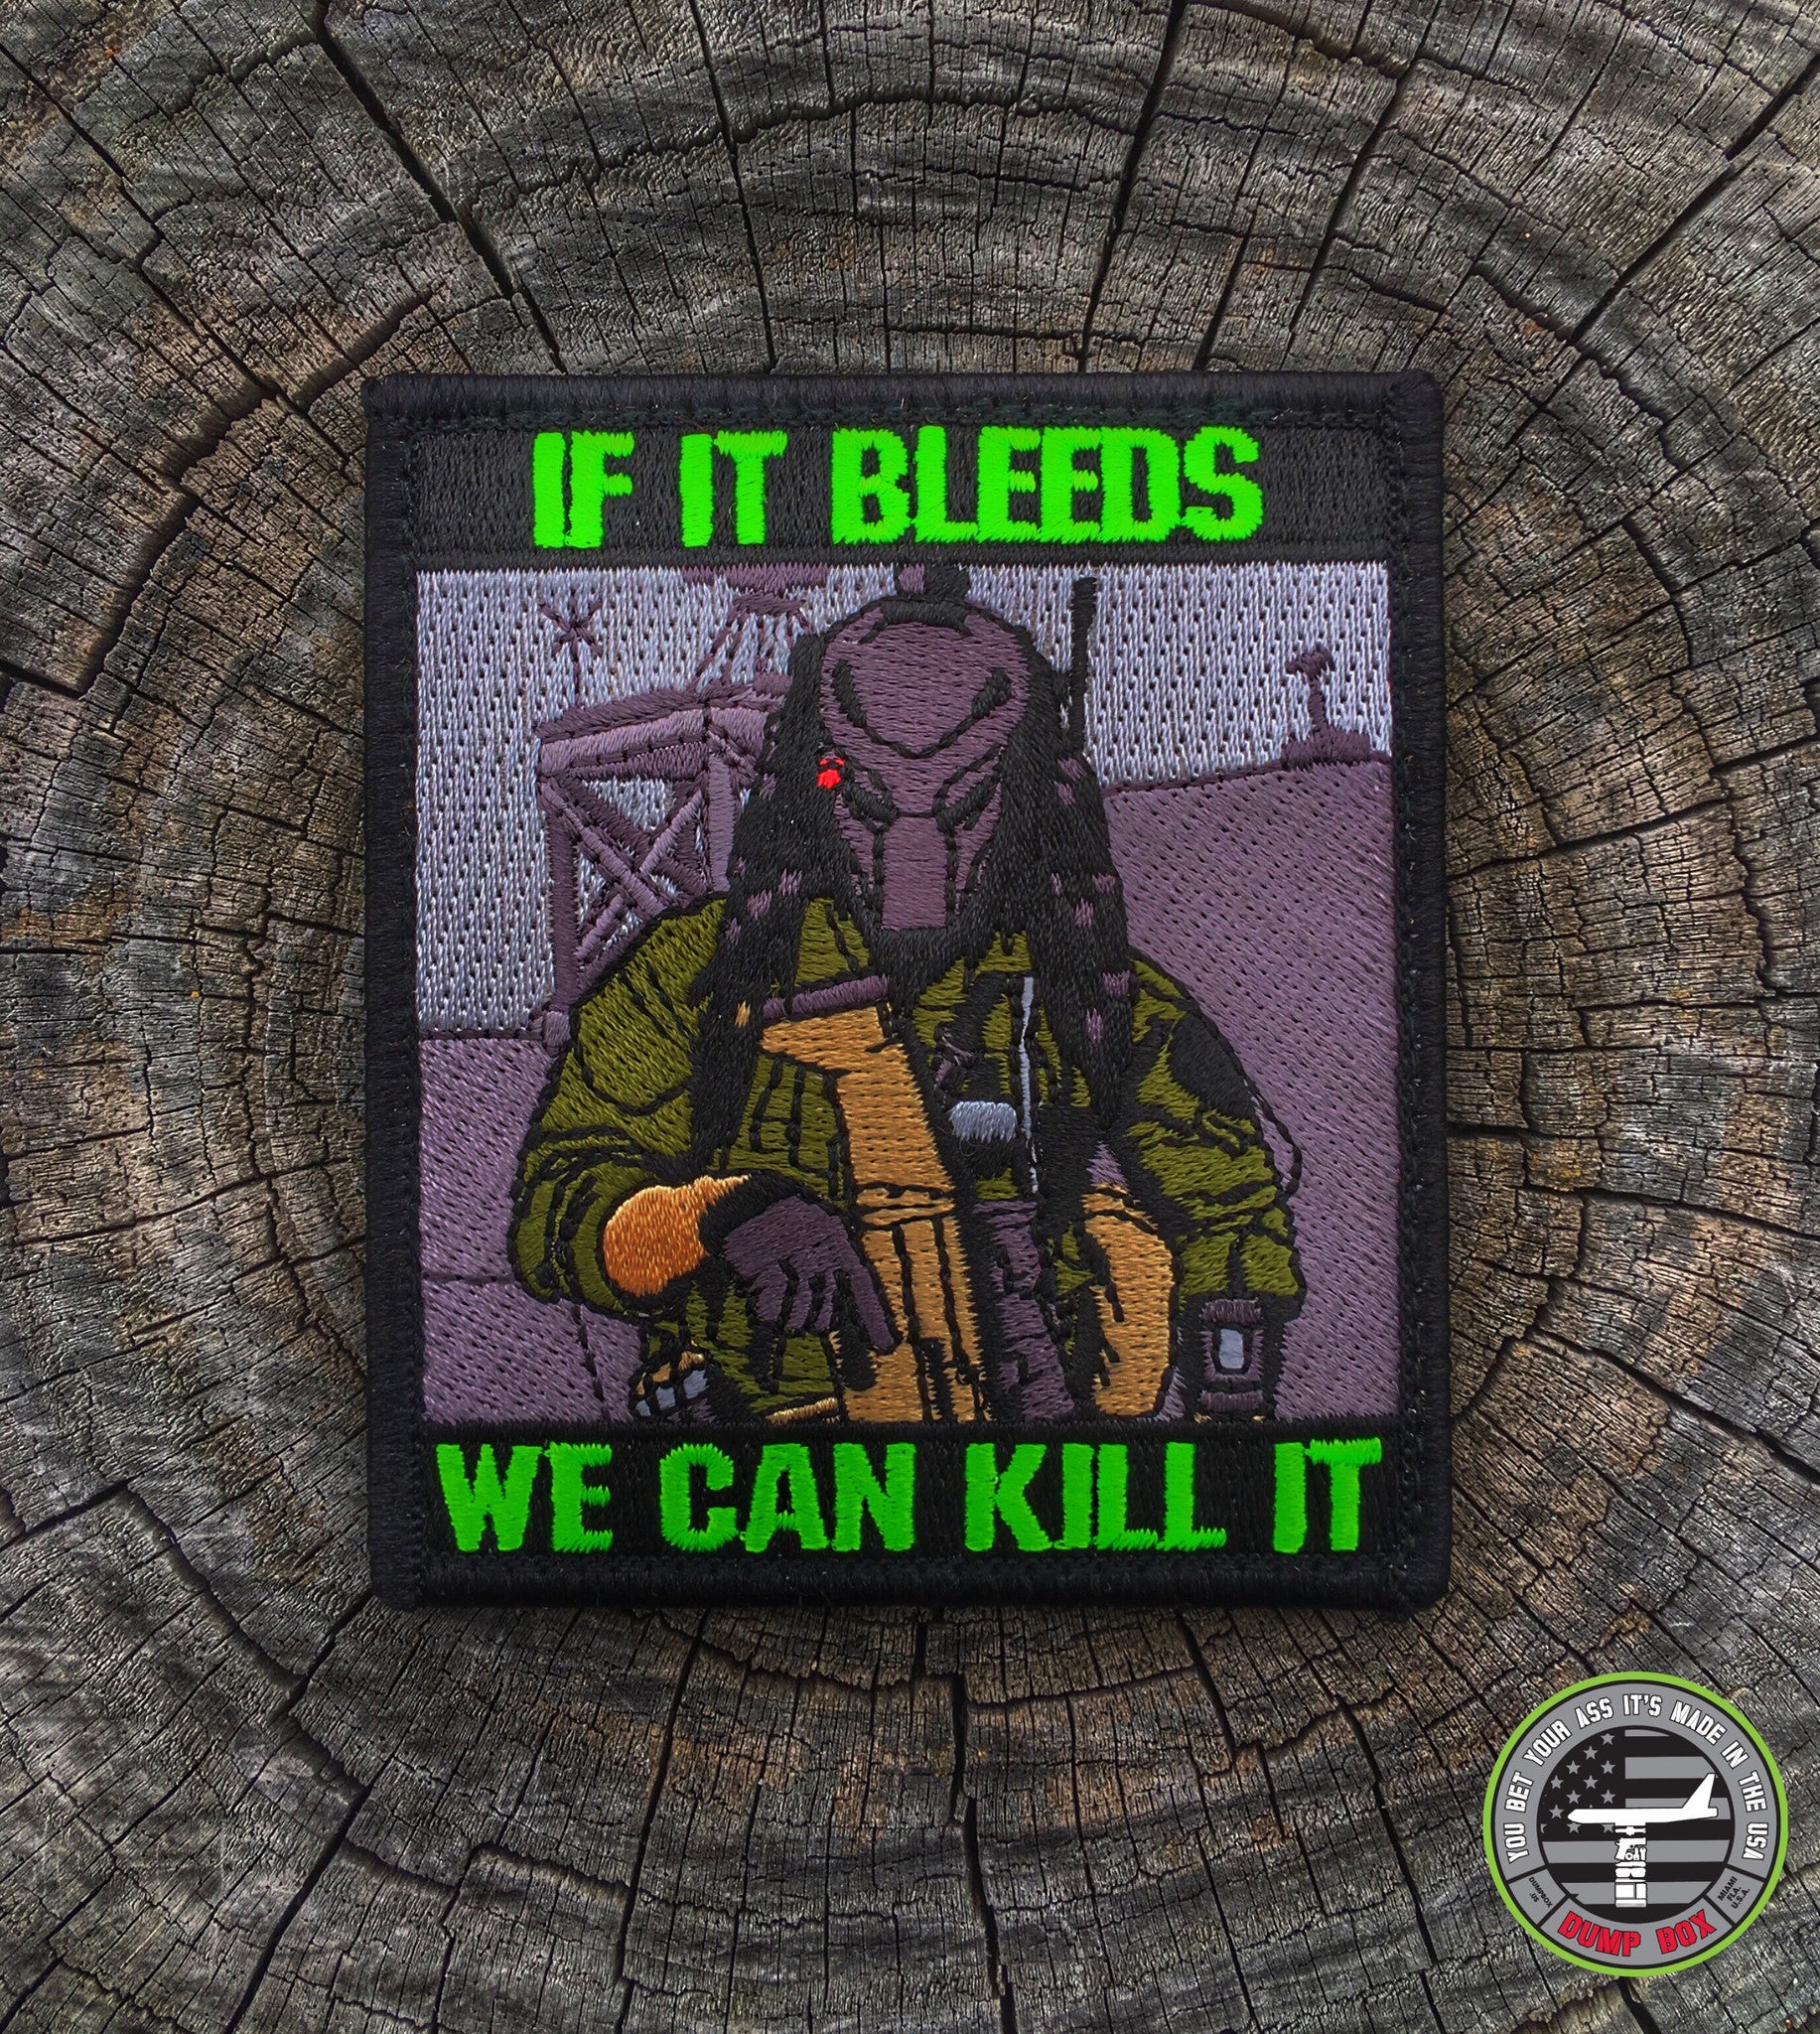 Embroidered patch depicting A man wearing a mask while holding a gun with text that reads If it bleeds we can kill it